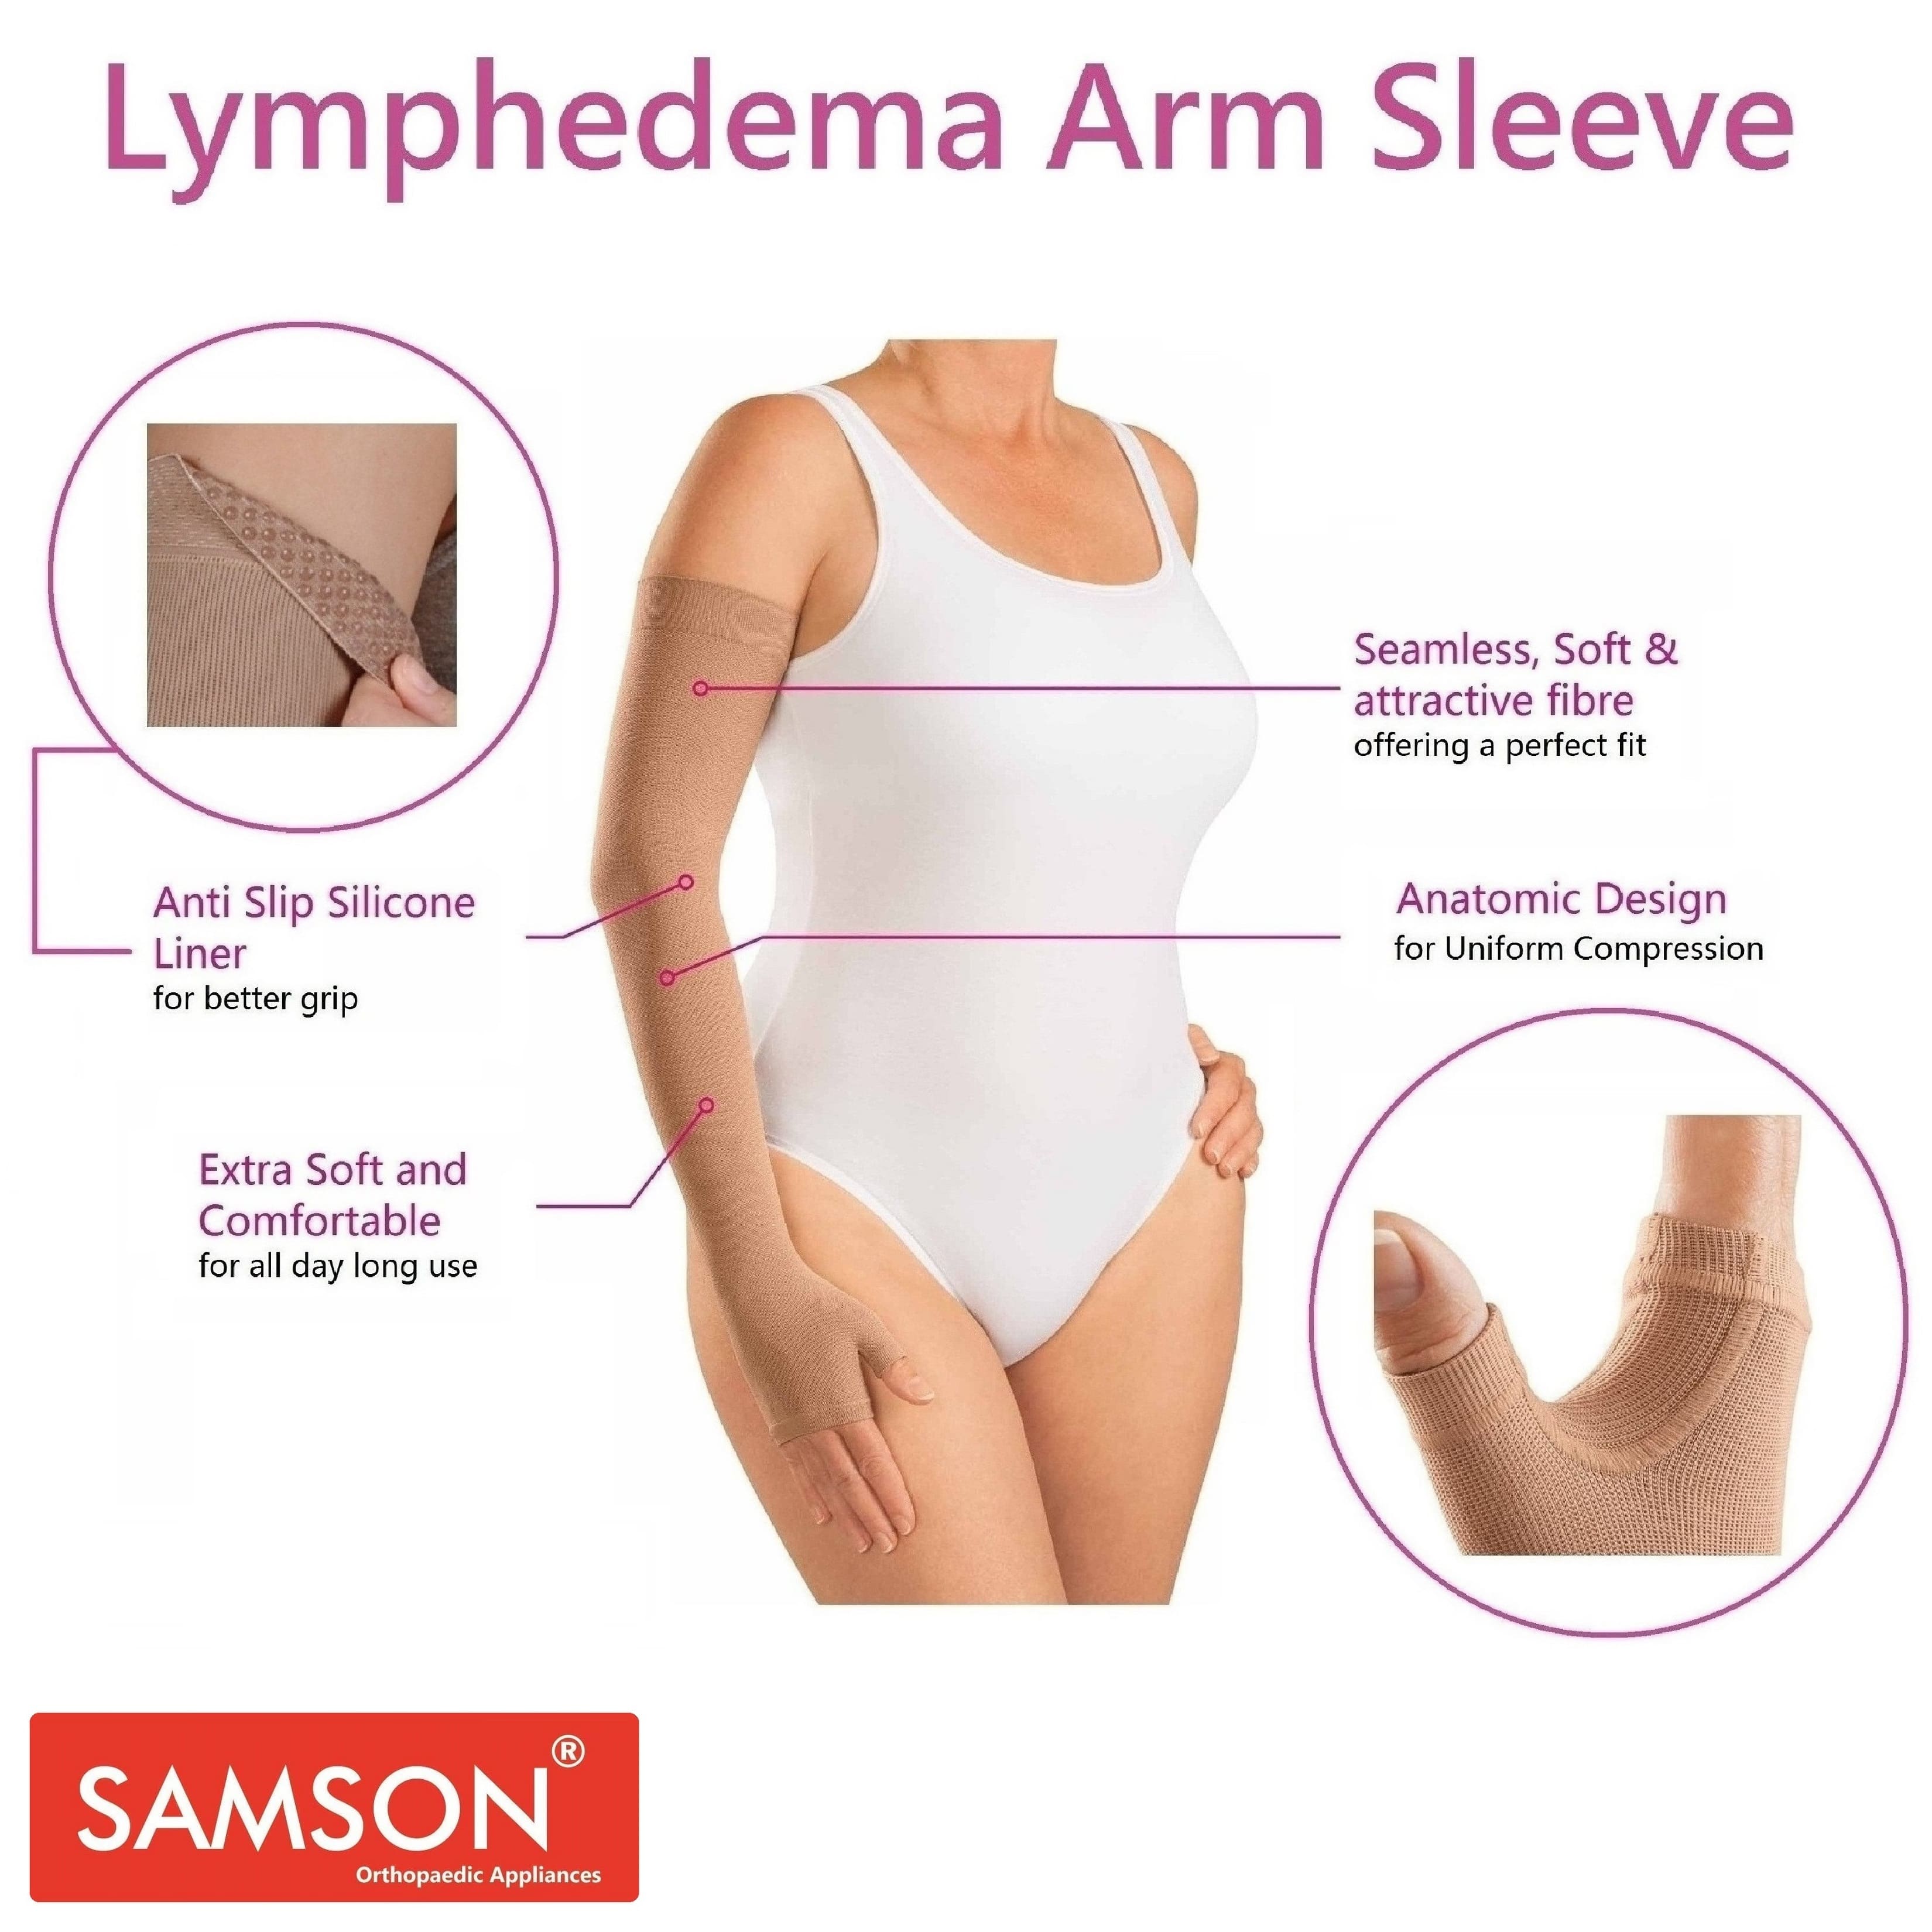 What Do Compression Arm Sleeves Actually Do? - Mastectomy Shop